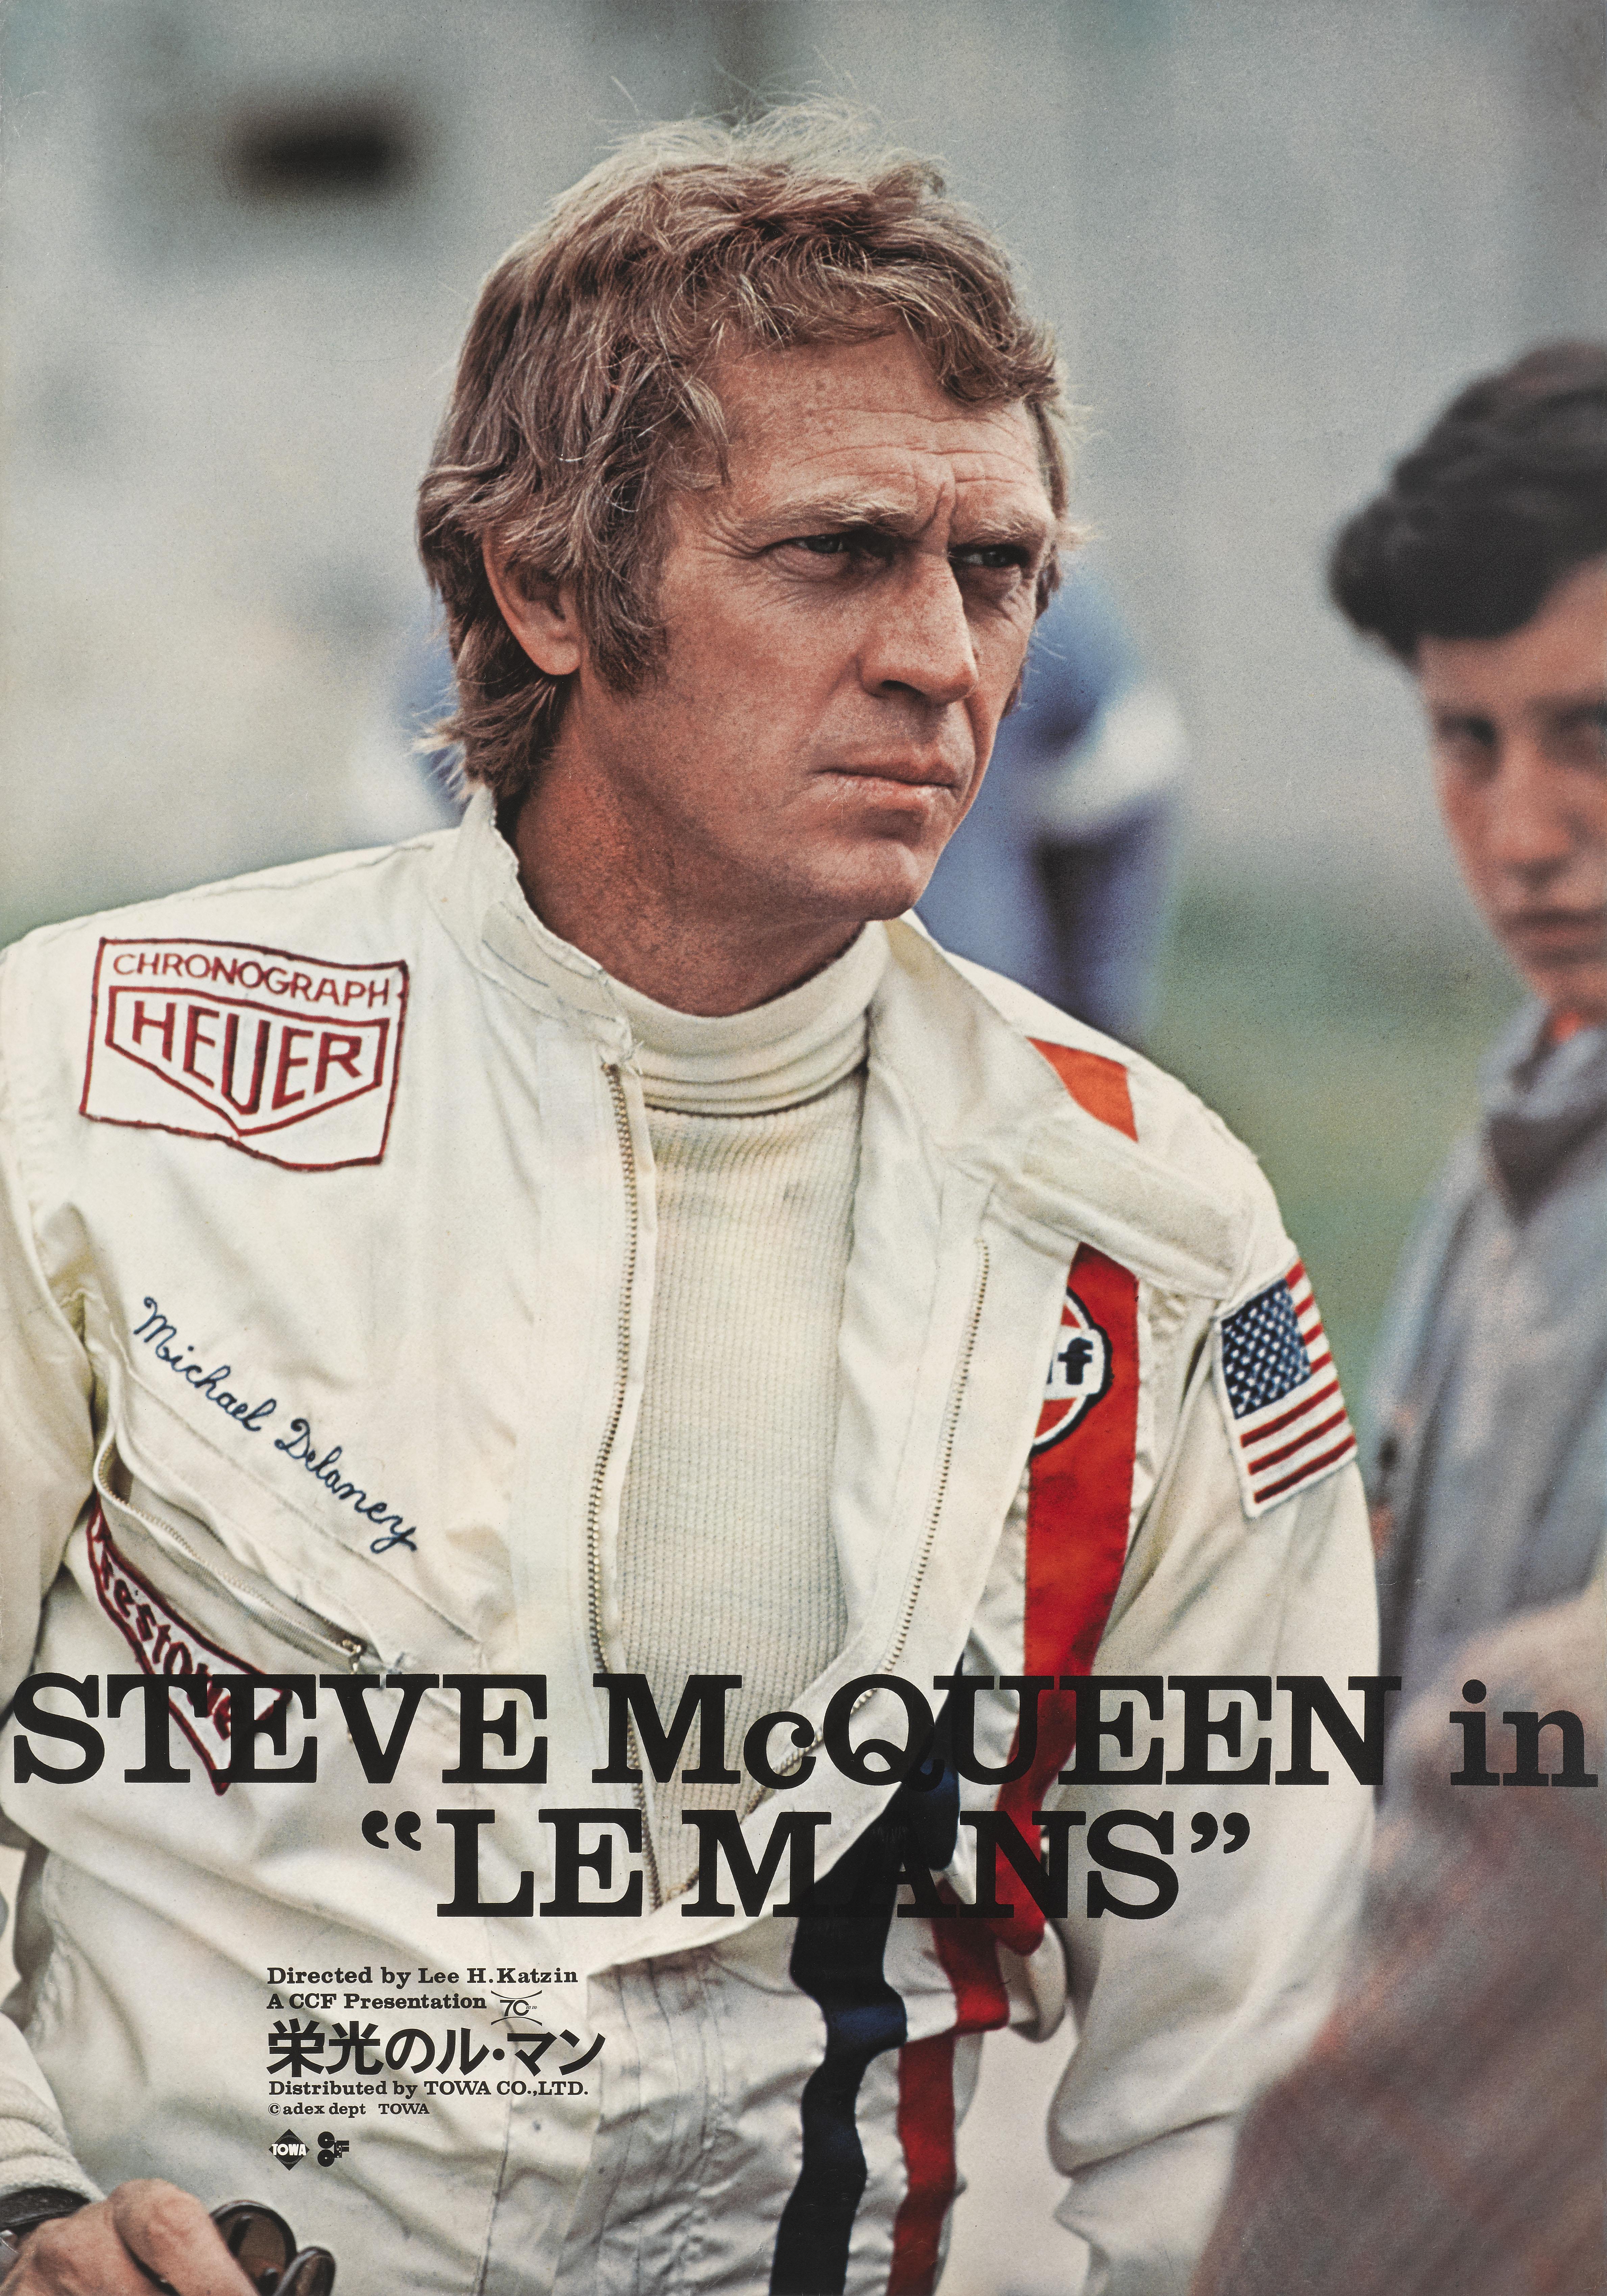 Original Japanese style B English text style film poster from the Classic 1971 Steve McQueen racing film. This poster is unfolded and conservation linen backed and would be shipped rolled in a strong tube and shipped by Federal Express.